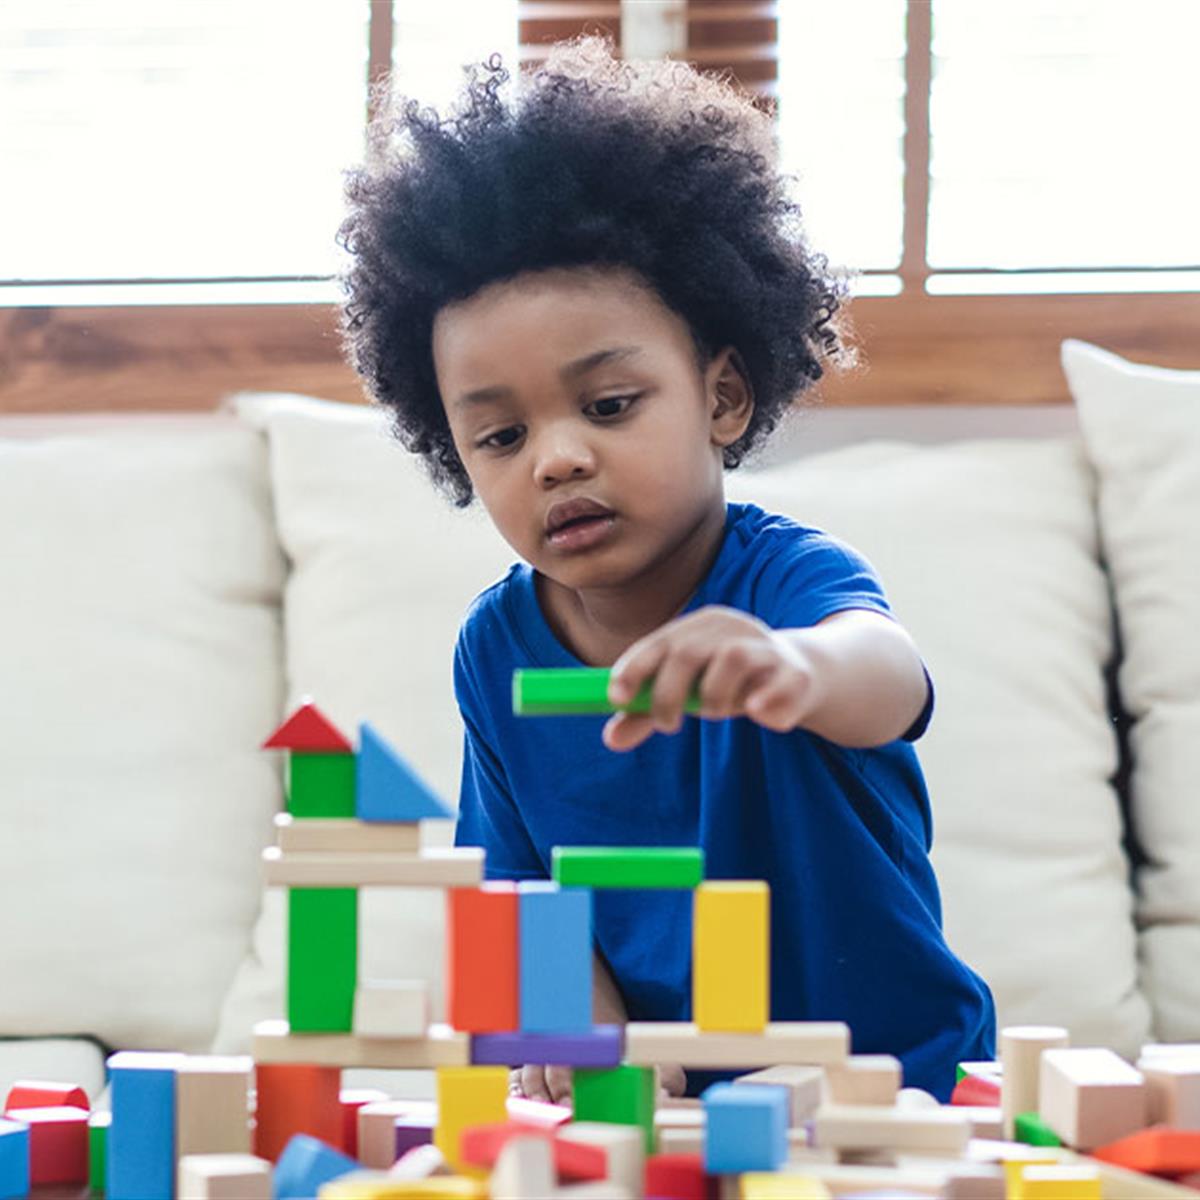 Child Development Toys by Age: Choosing the Best Toys for Your Child